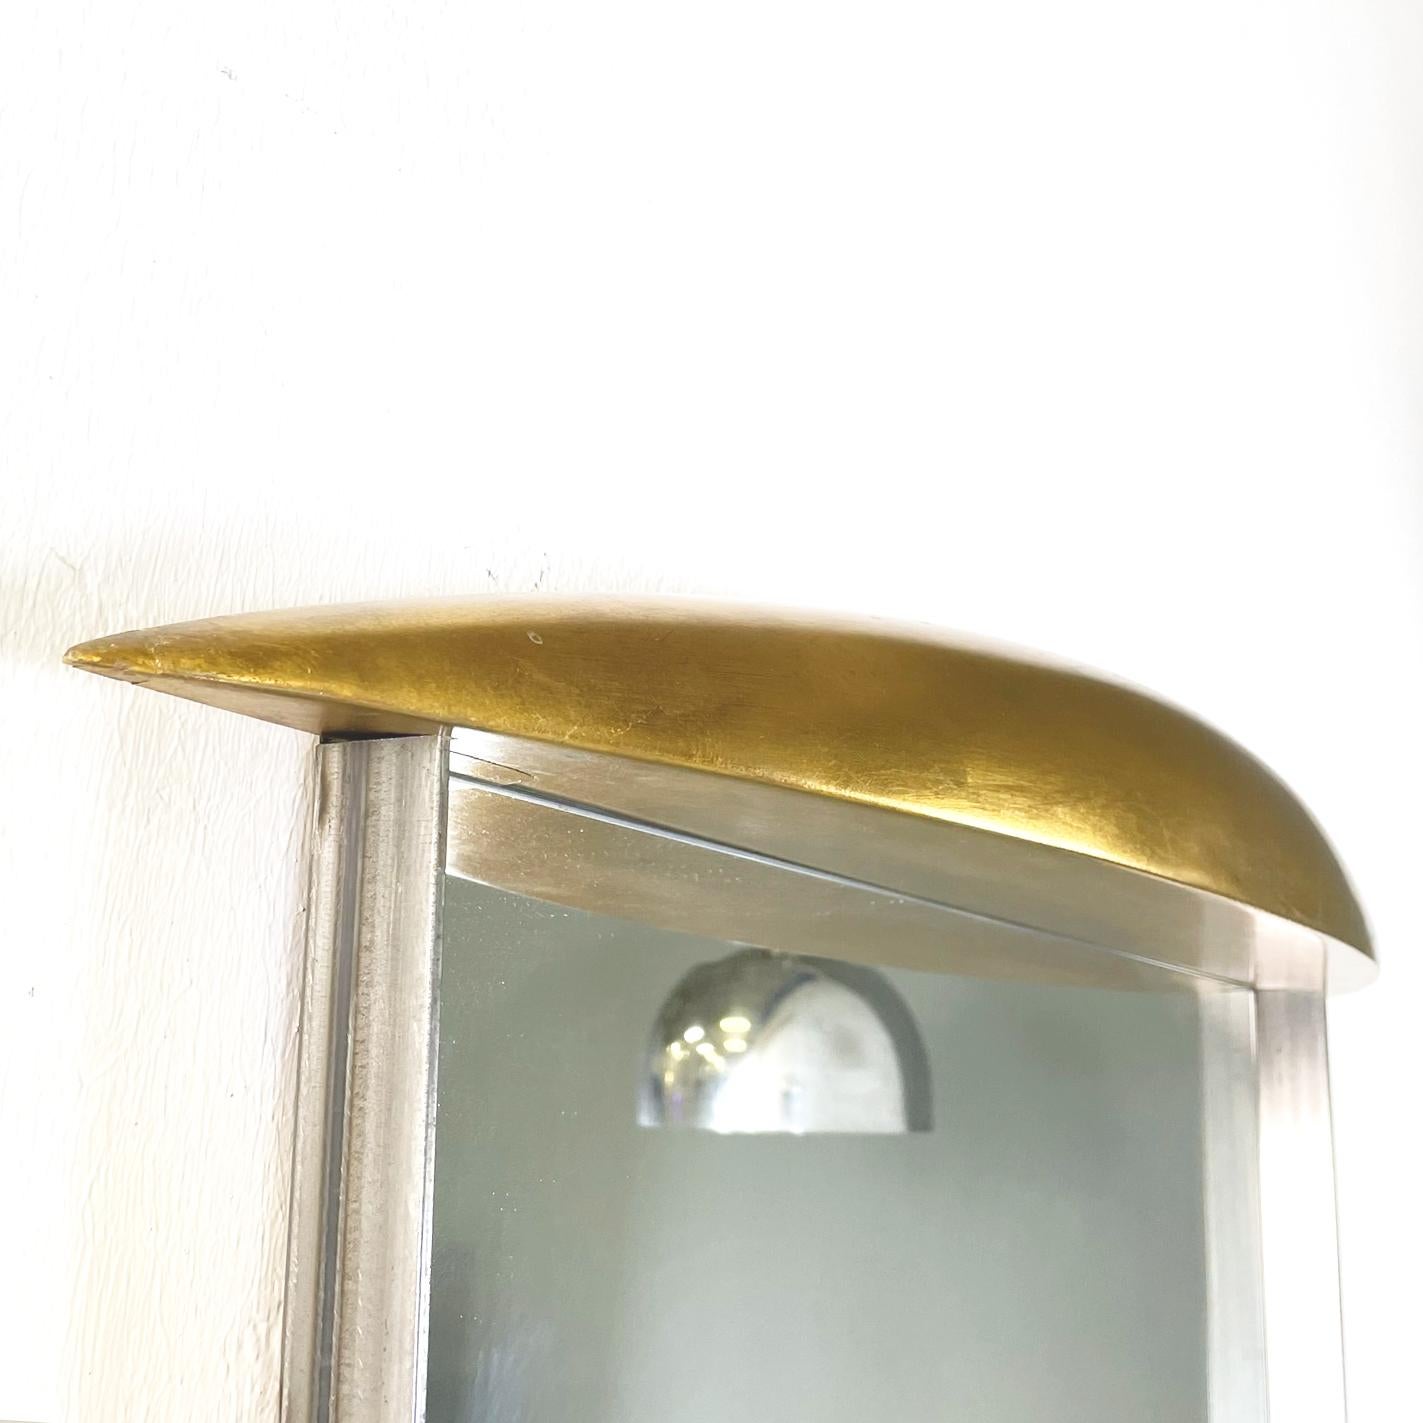 Italian Modern Full-Length Wall Mirror in Gold Wood and Metal, 1980s For Sale 2